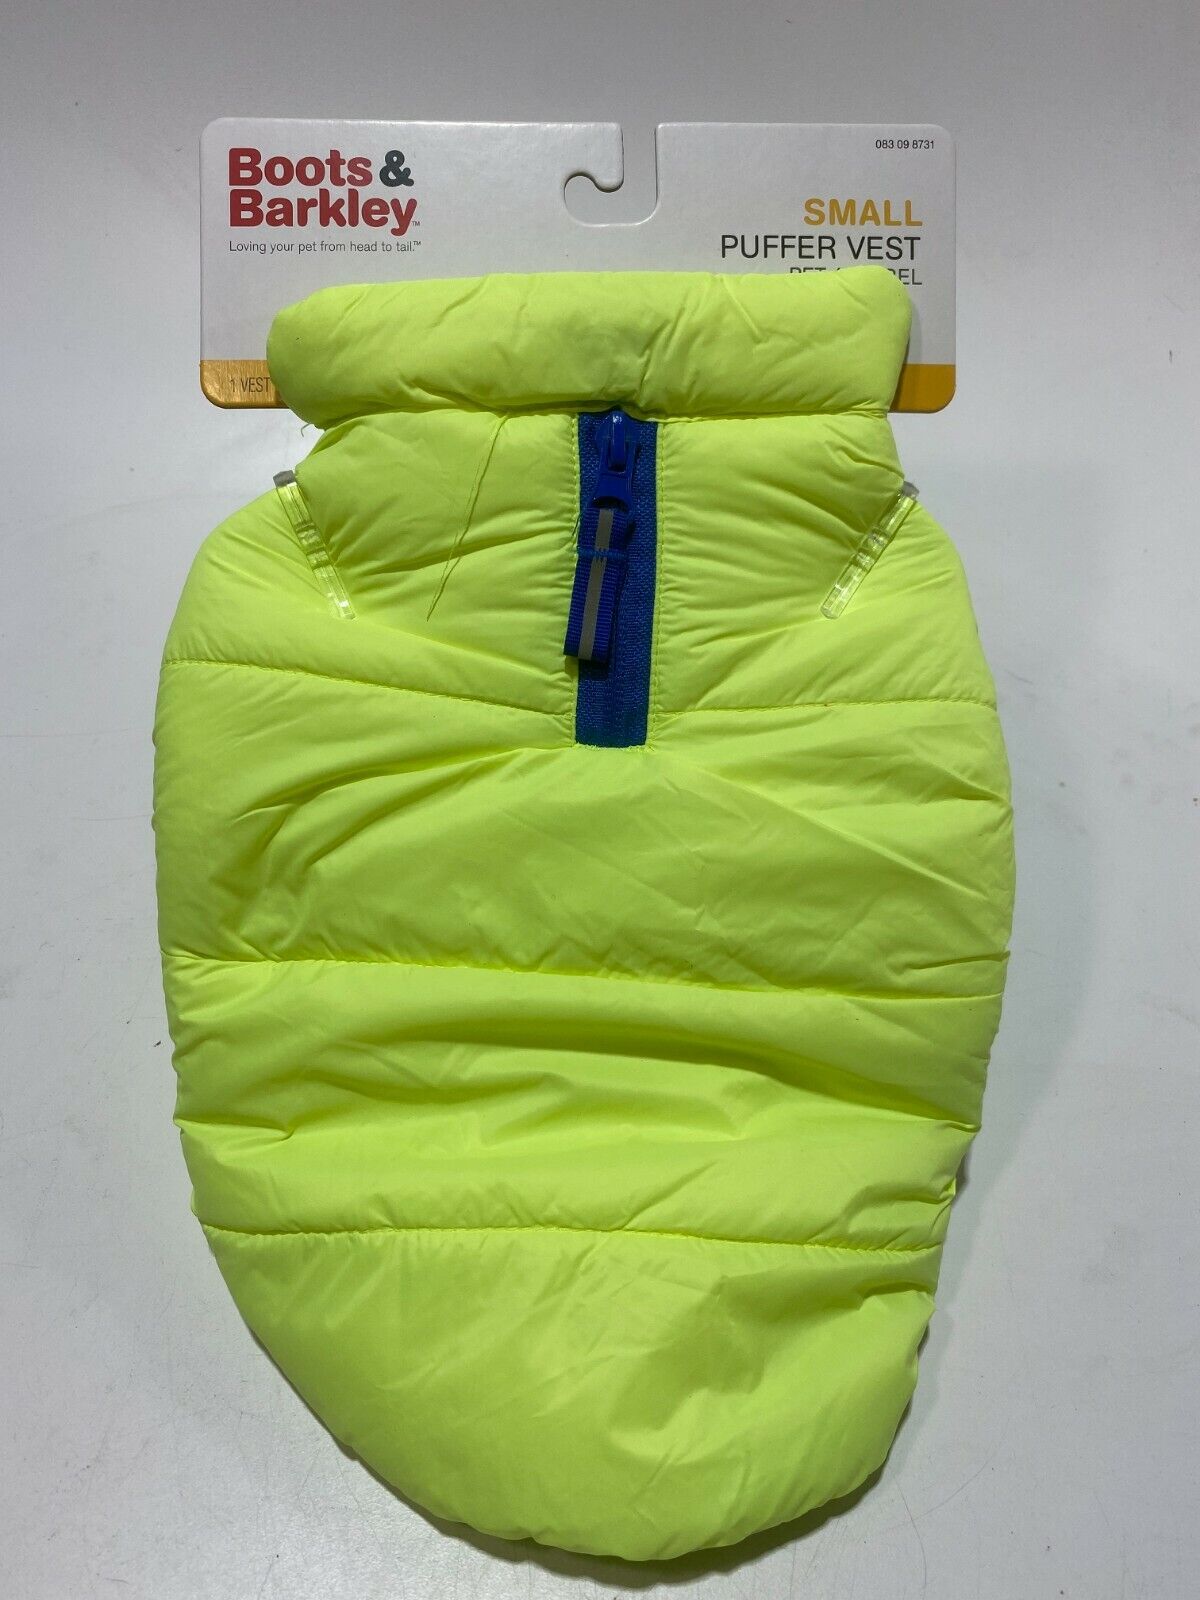 Winter Dog Puffer Vest Jacket - Neon Yellow - Small - Boots & Barkley - NWT